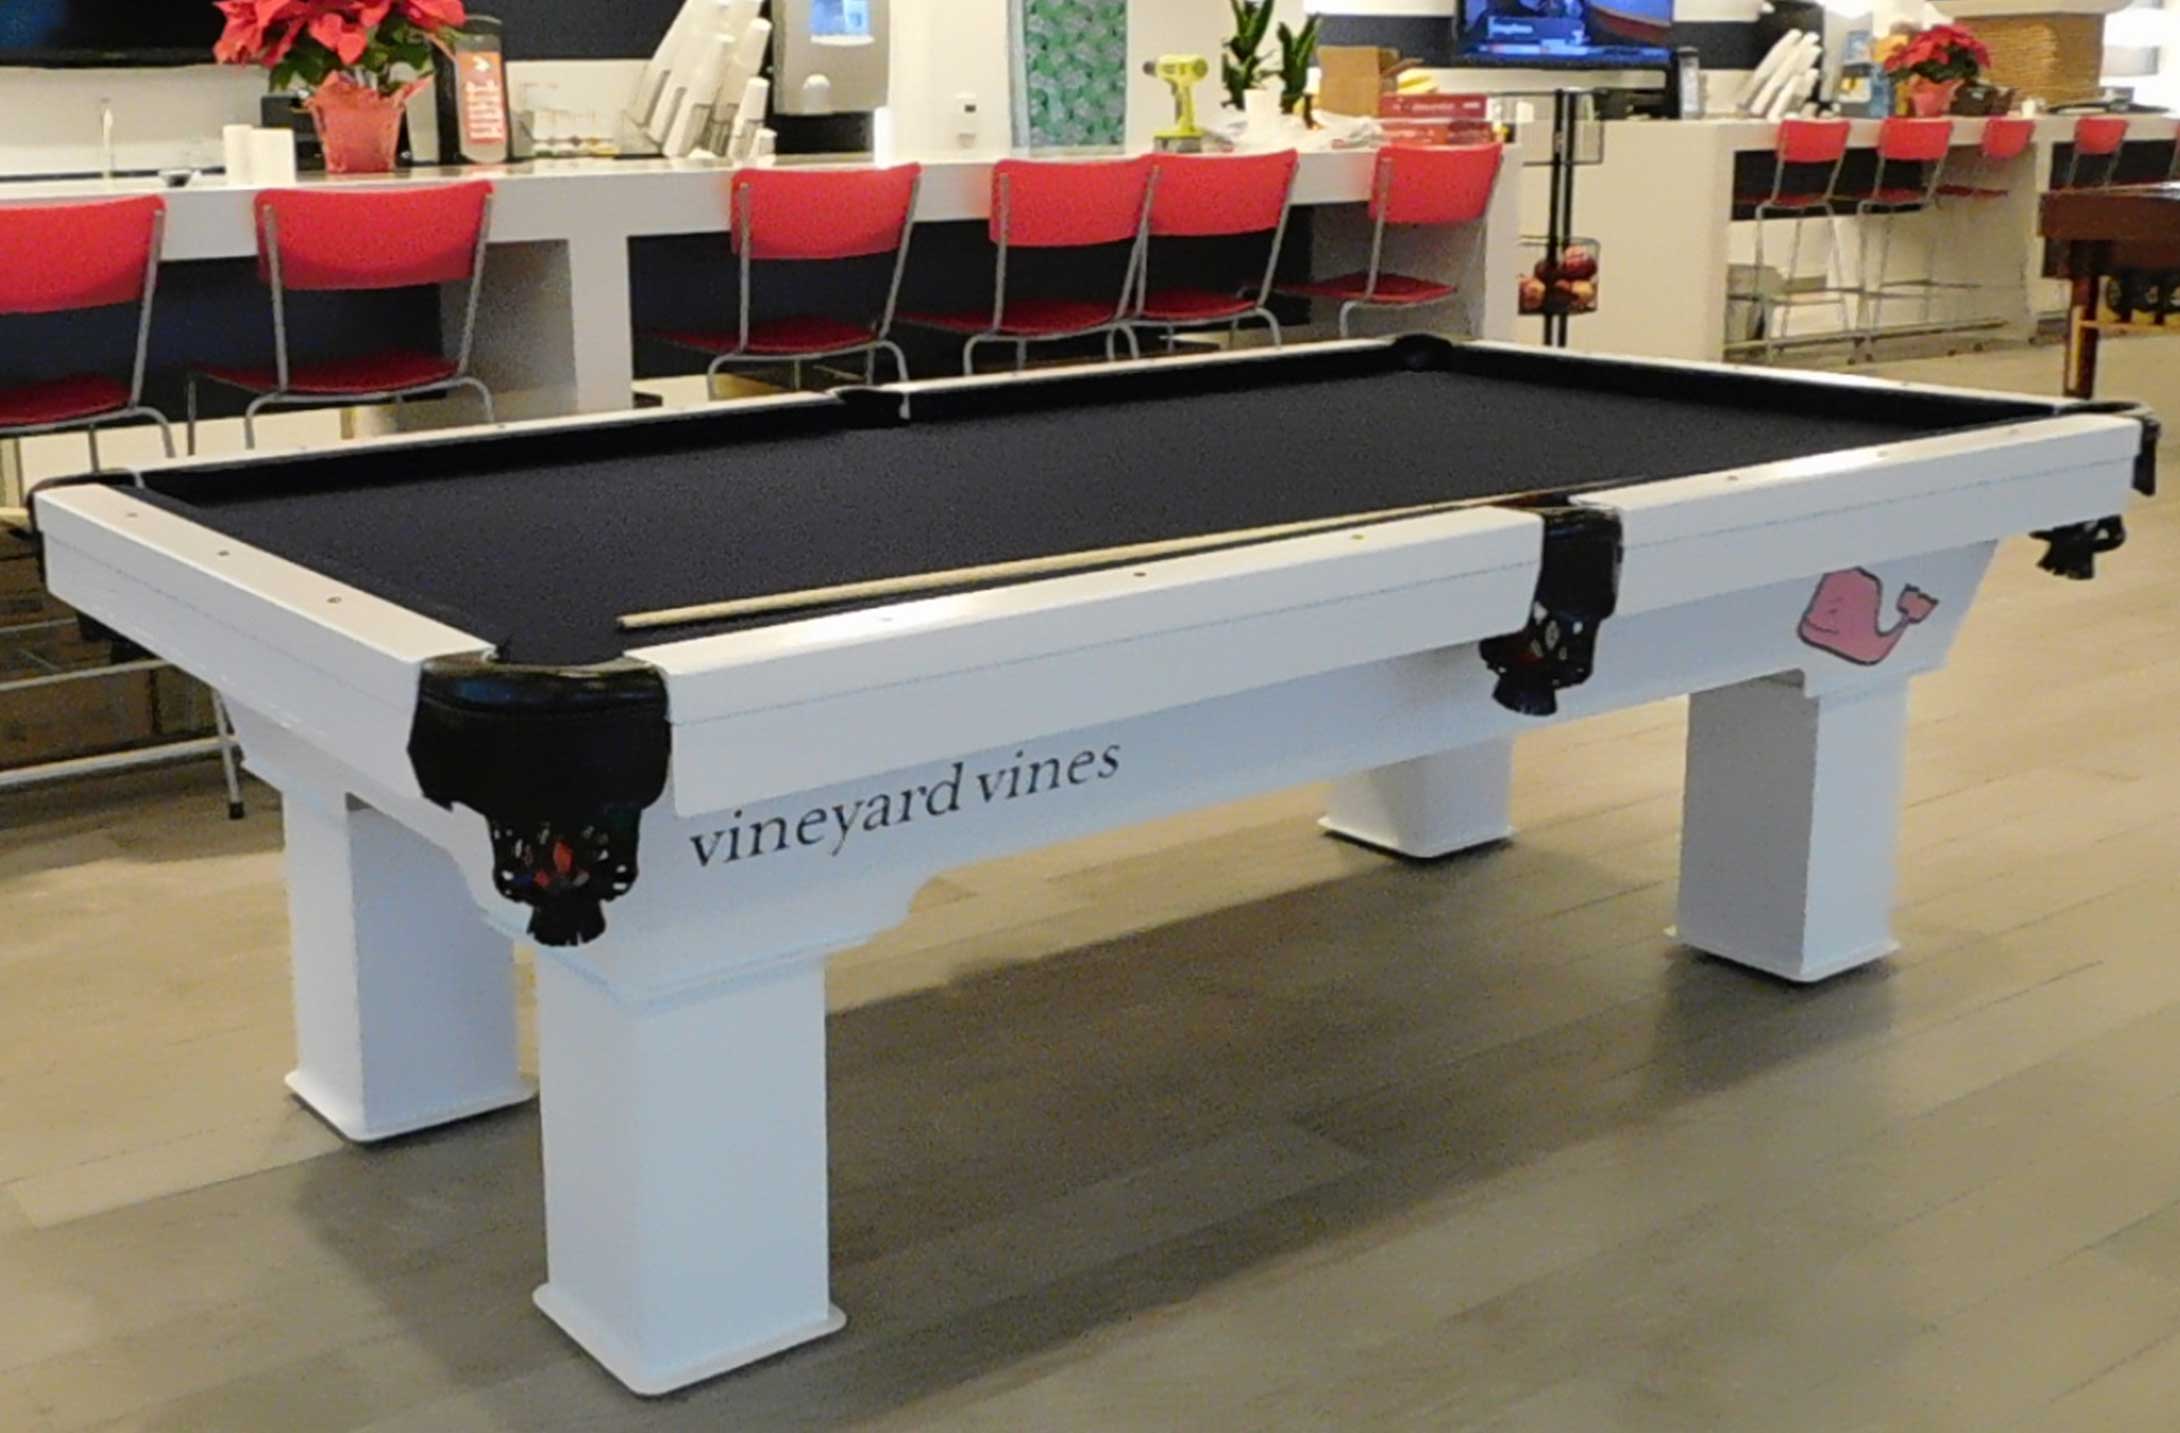 Vineyard Vine's custom outdoor pool table with company logo from R&R Outdoors All Weather Billiards